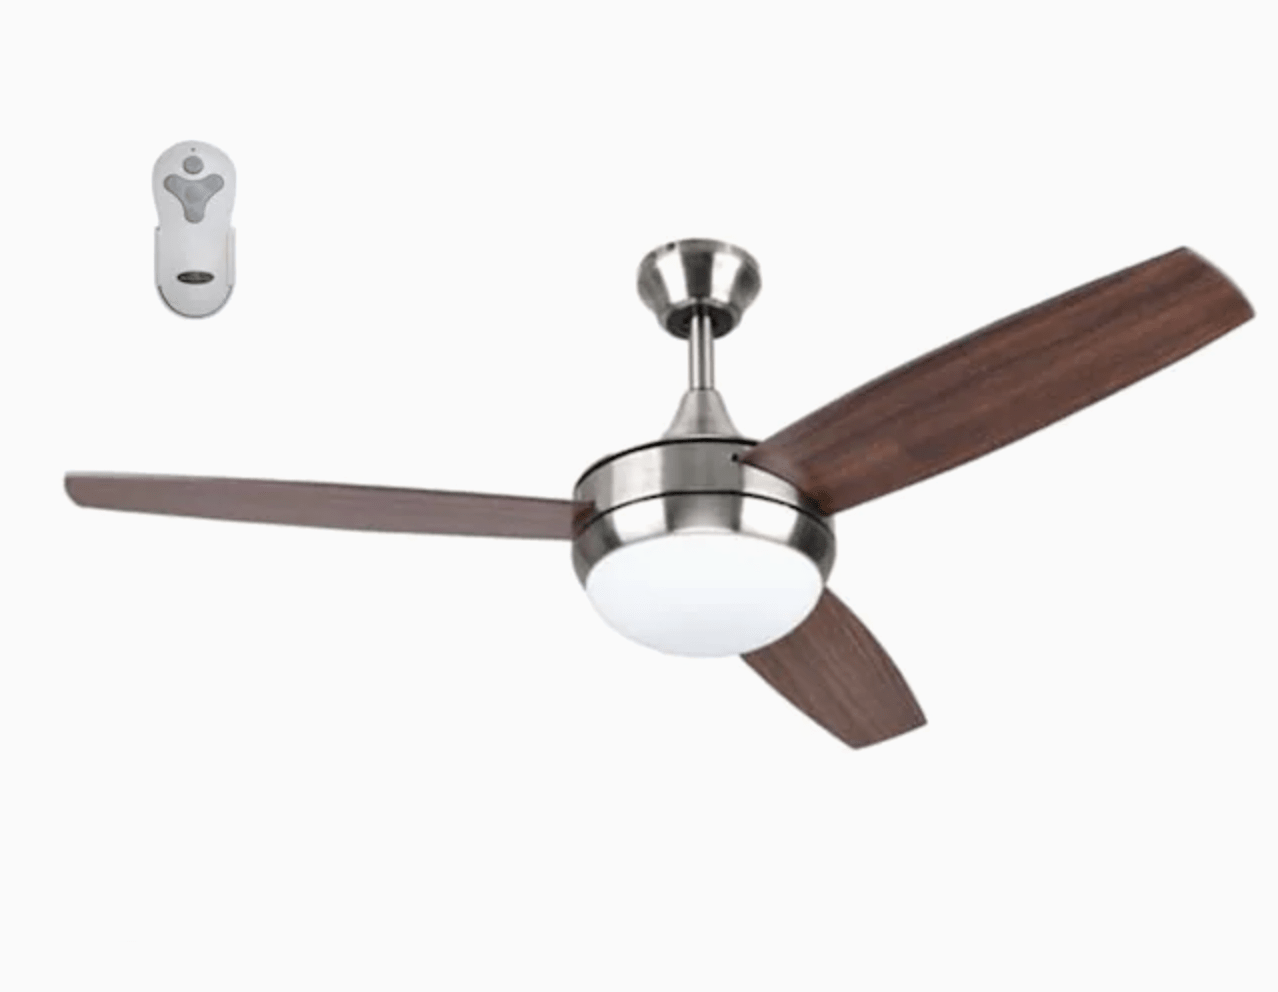 7 Best Ceiling Fans Of 2021, Which Is The Best Brand For Ceiling Fans